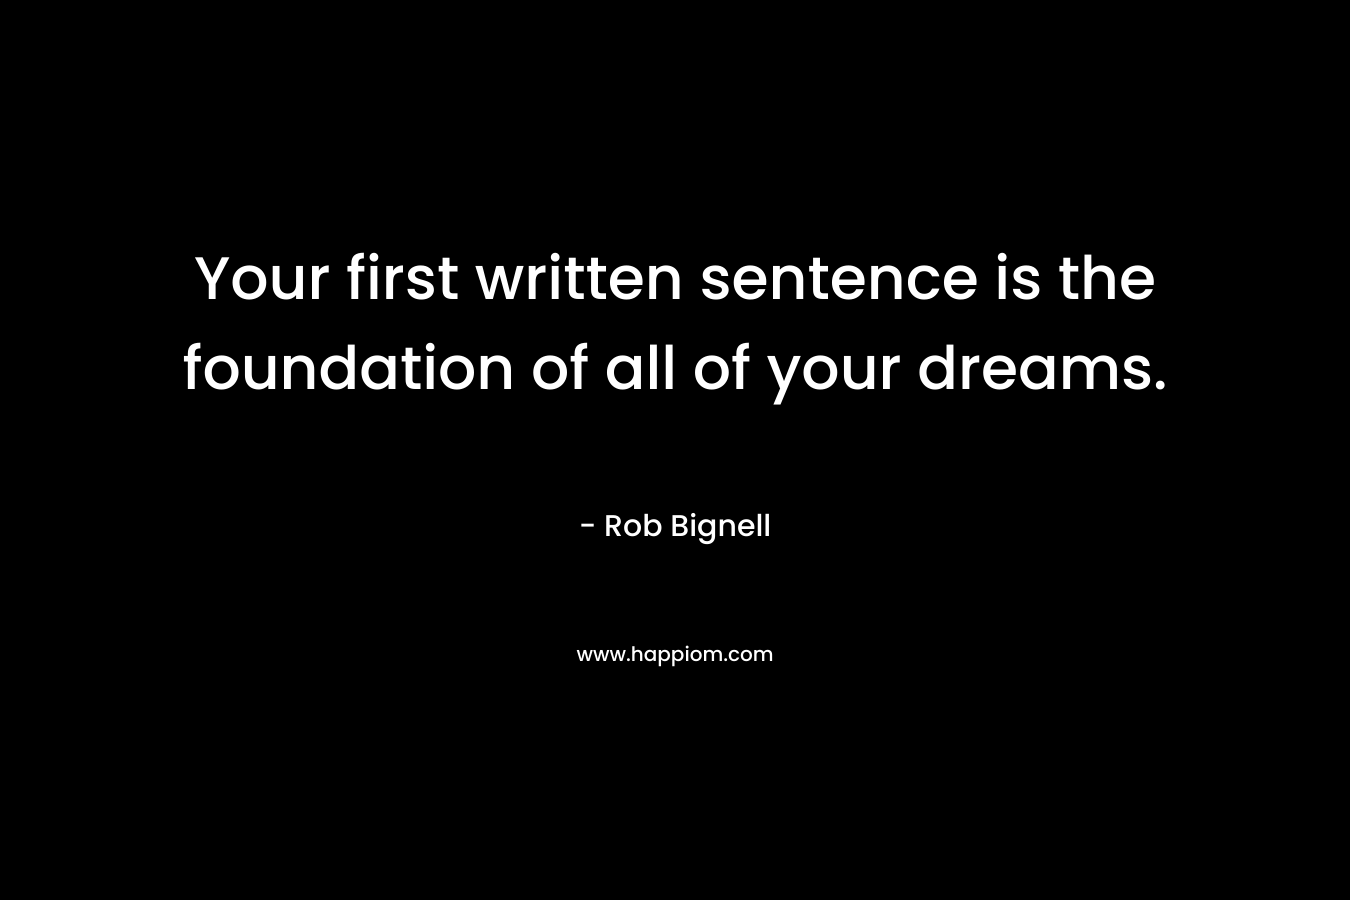 Your first written sentence is the foundation of all of your dreams. – Rob Bignell